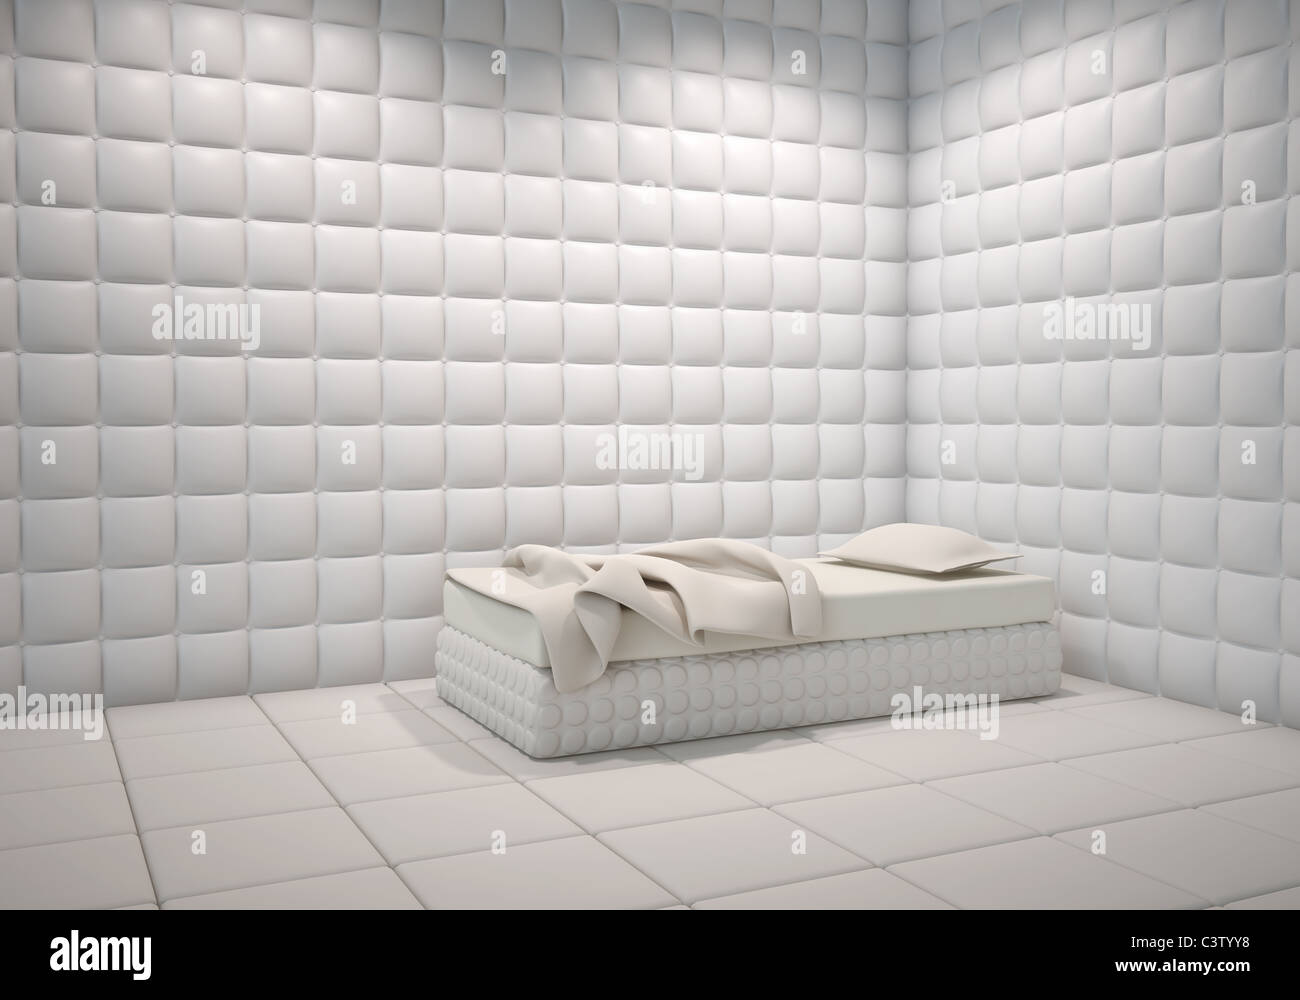 white-mental-hospital-padded-room-corner-with-a-bed-C3TYY8.jpg